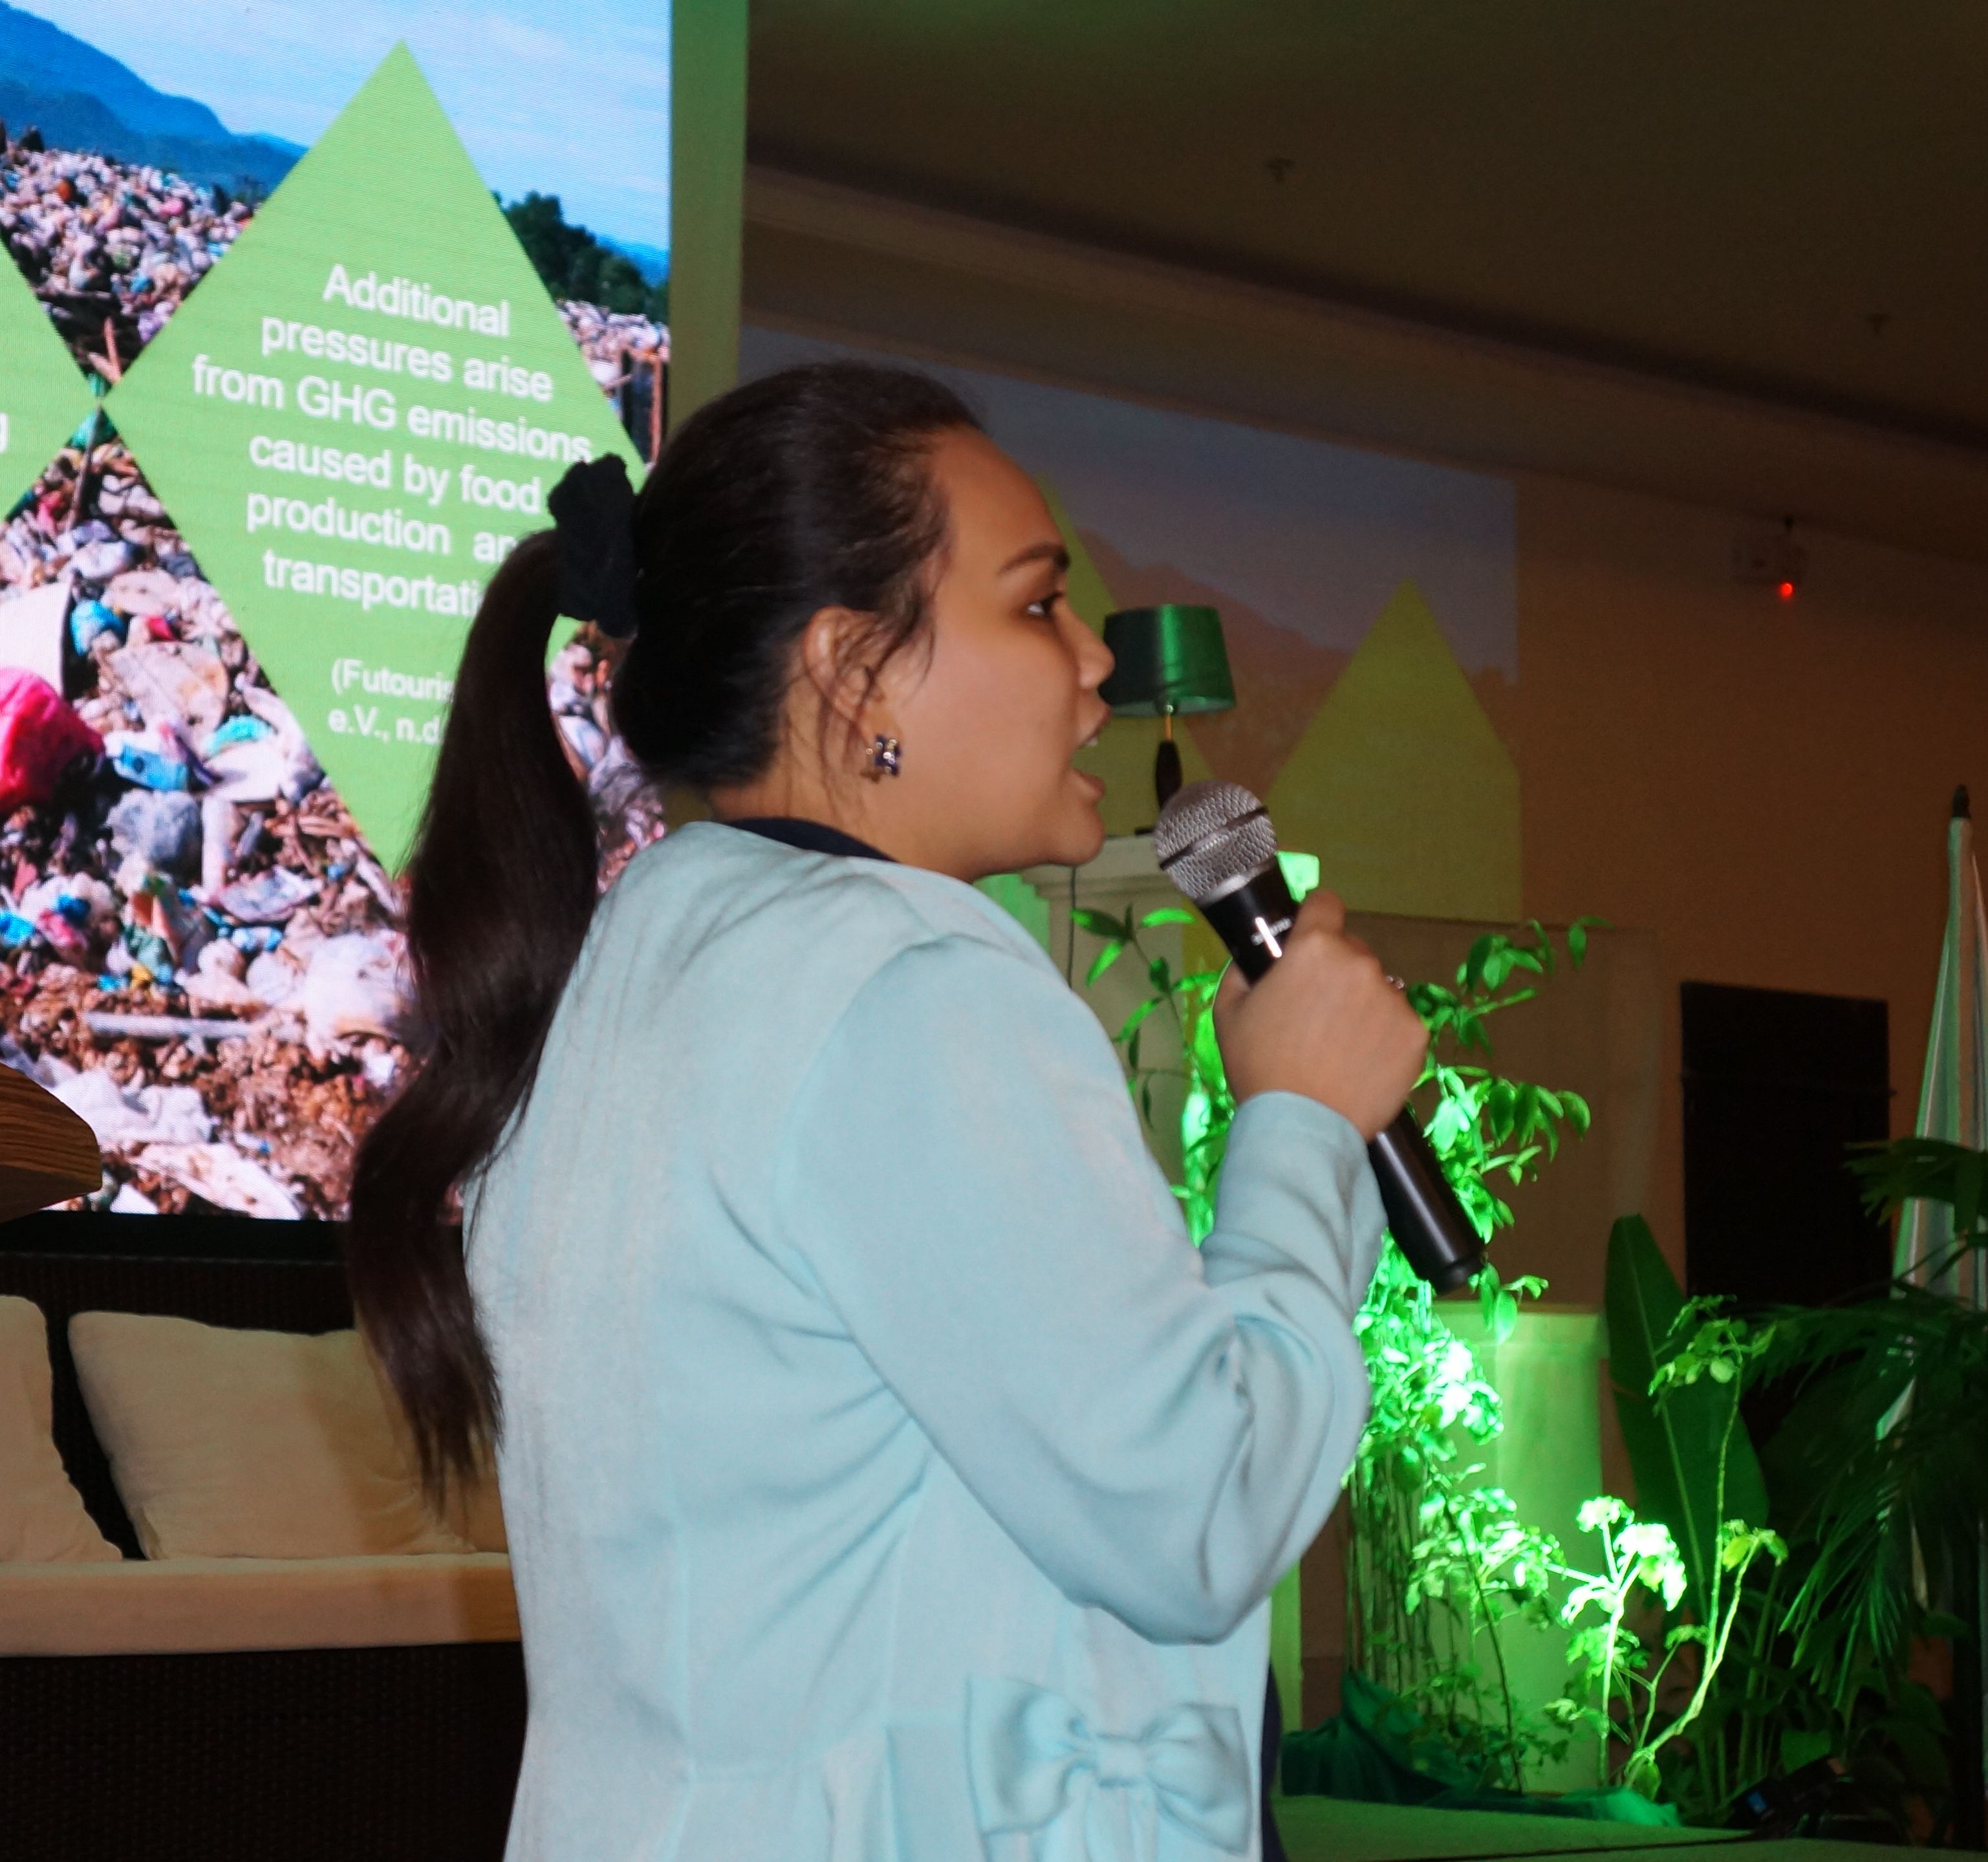 <h1>Sharing SCP at the 10th PLLENRO NatCon</h1>
<p>Last March 1, 2019, World Wide Fund for Nature (WWF) Philippines’</p>
<p style="text-align: right;"><a href="https://support.wwf.org.ph/what-we-do/food/thesustainablediner/pllenro-national-convention/" target="_blank">Read More &gt;</a></p>